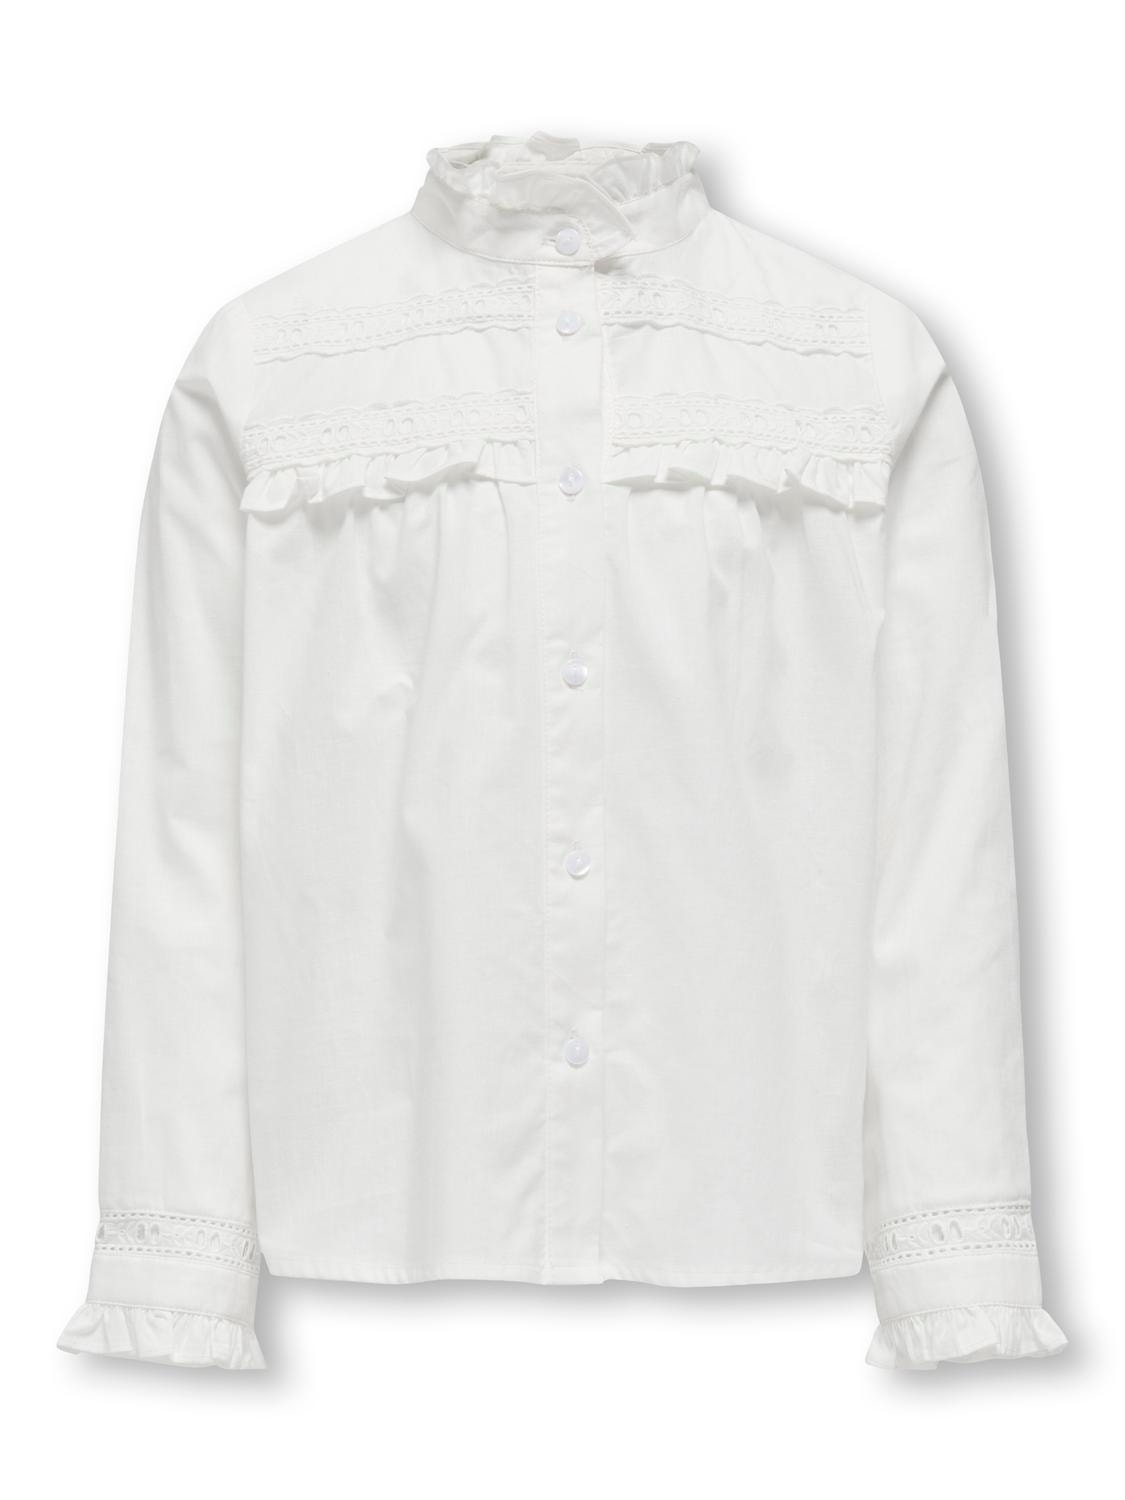 ONLY Shirt with frills -Cloud Dancer - 15320113